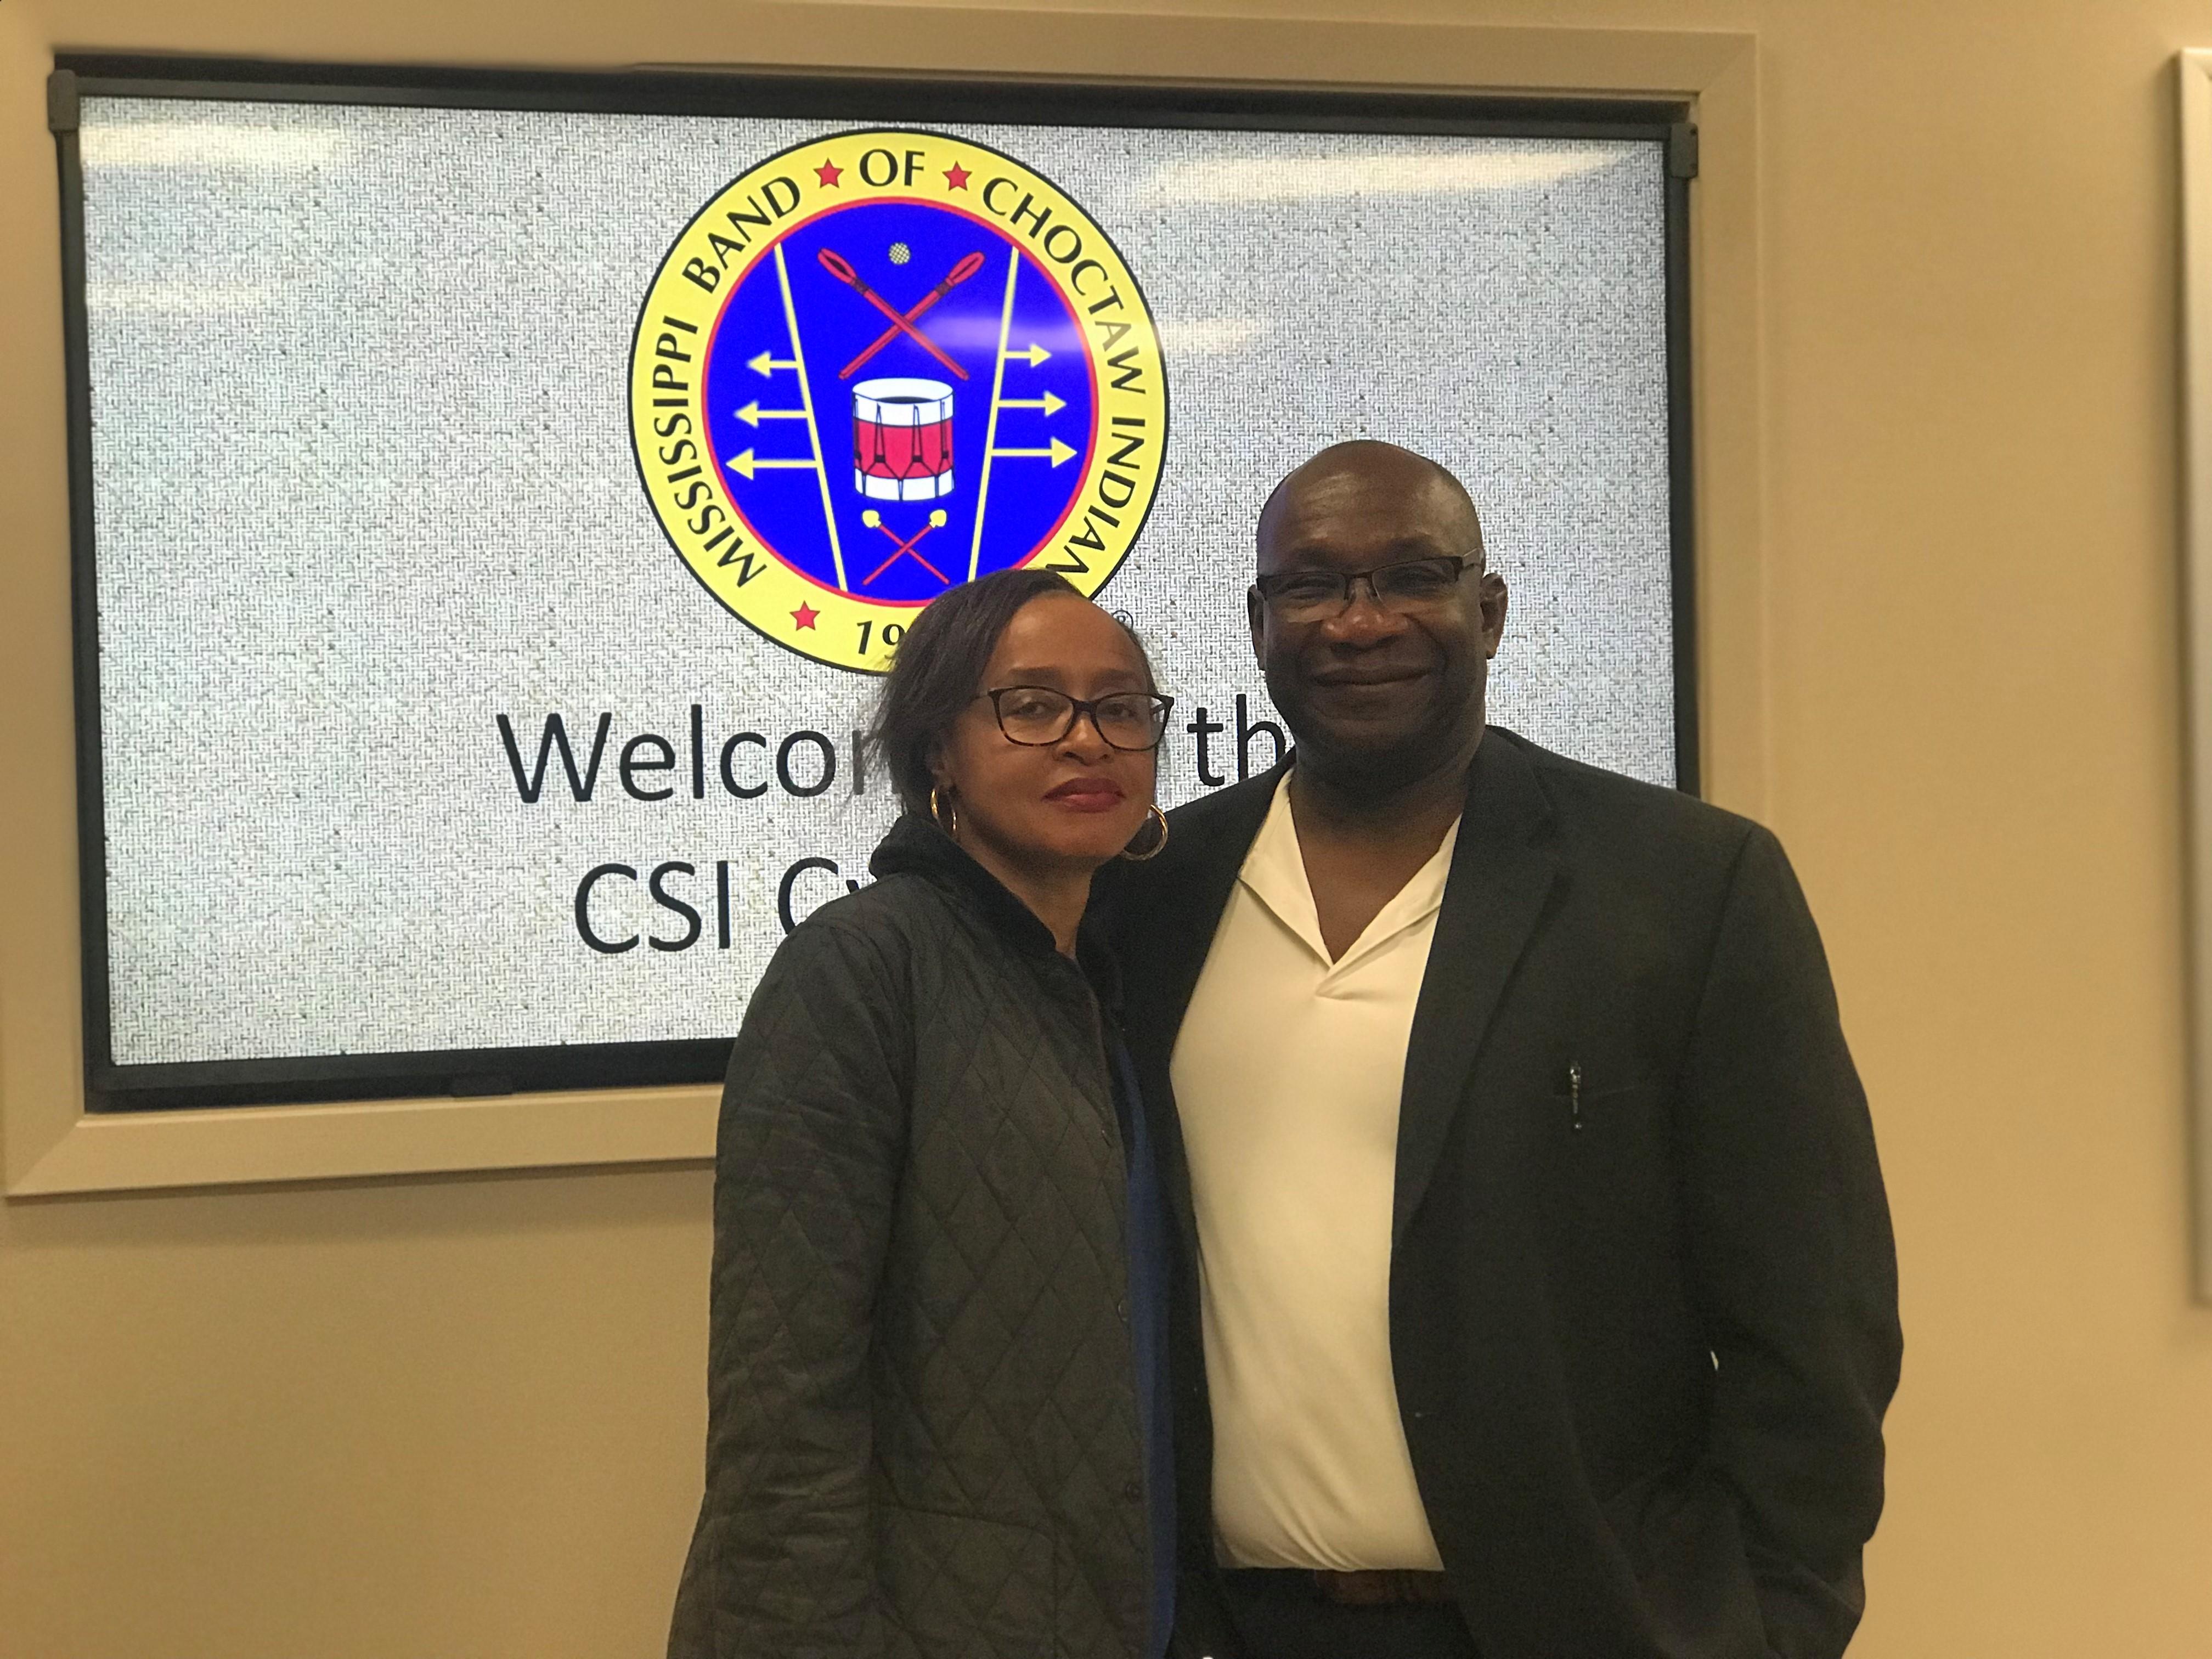 J.R. Richardson of Cockrell, Webb & Associates LLC and his wife on their visit to CSI Lab